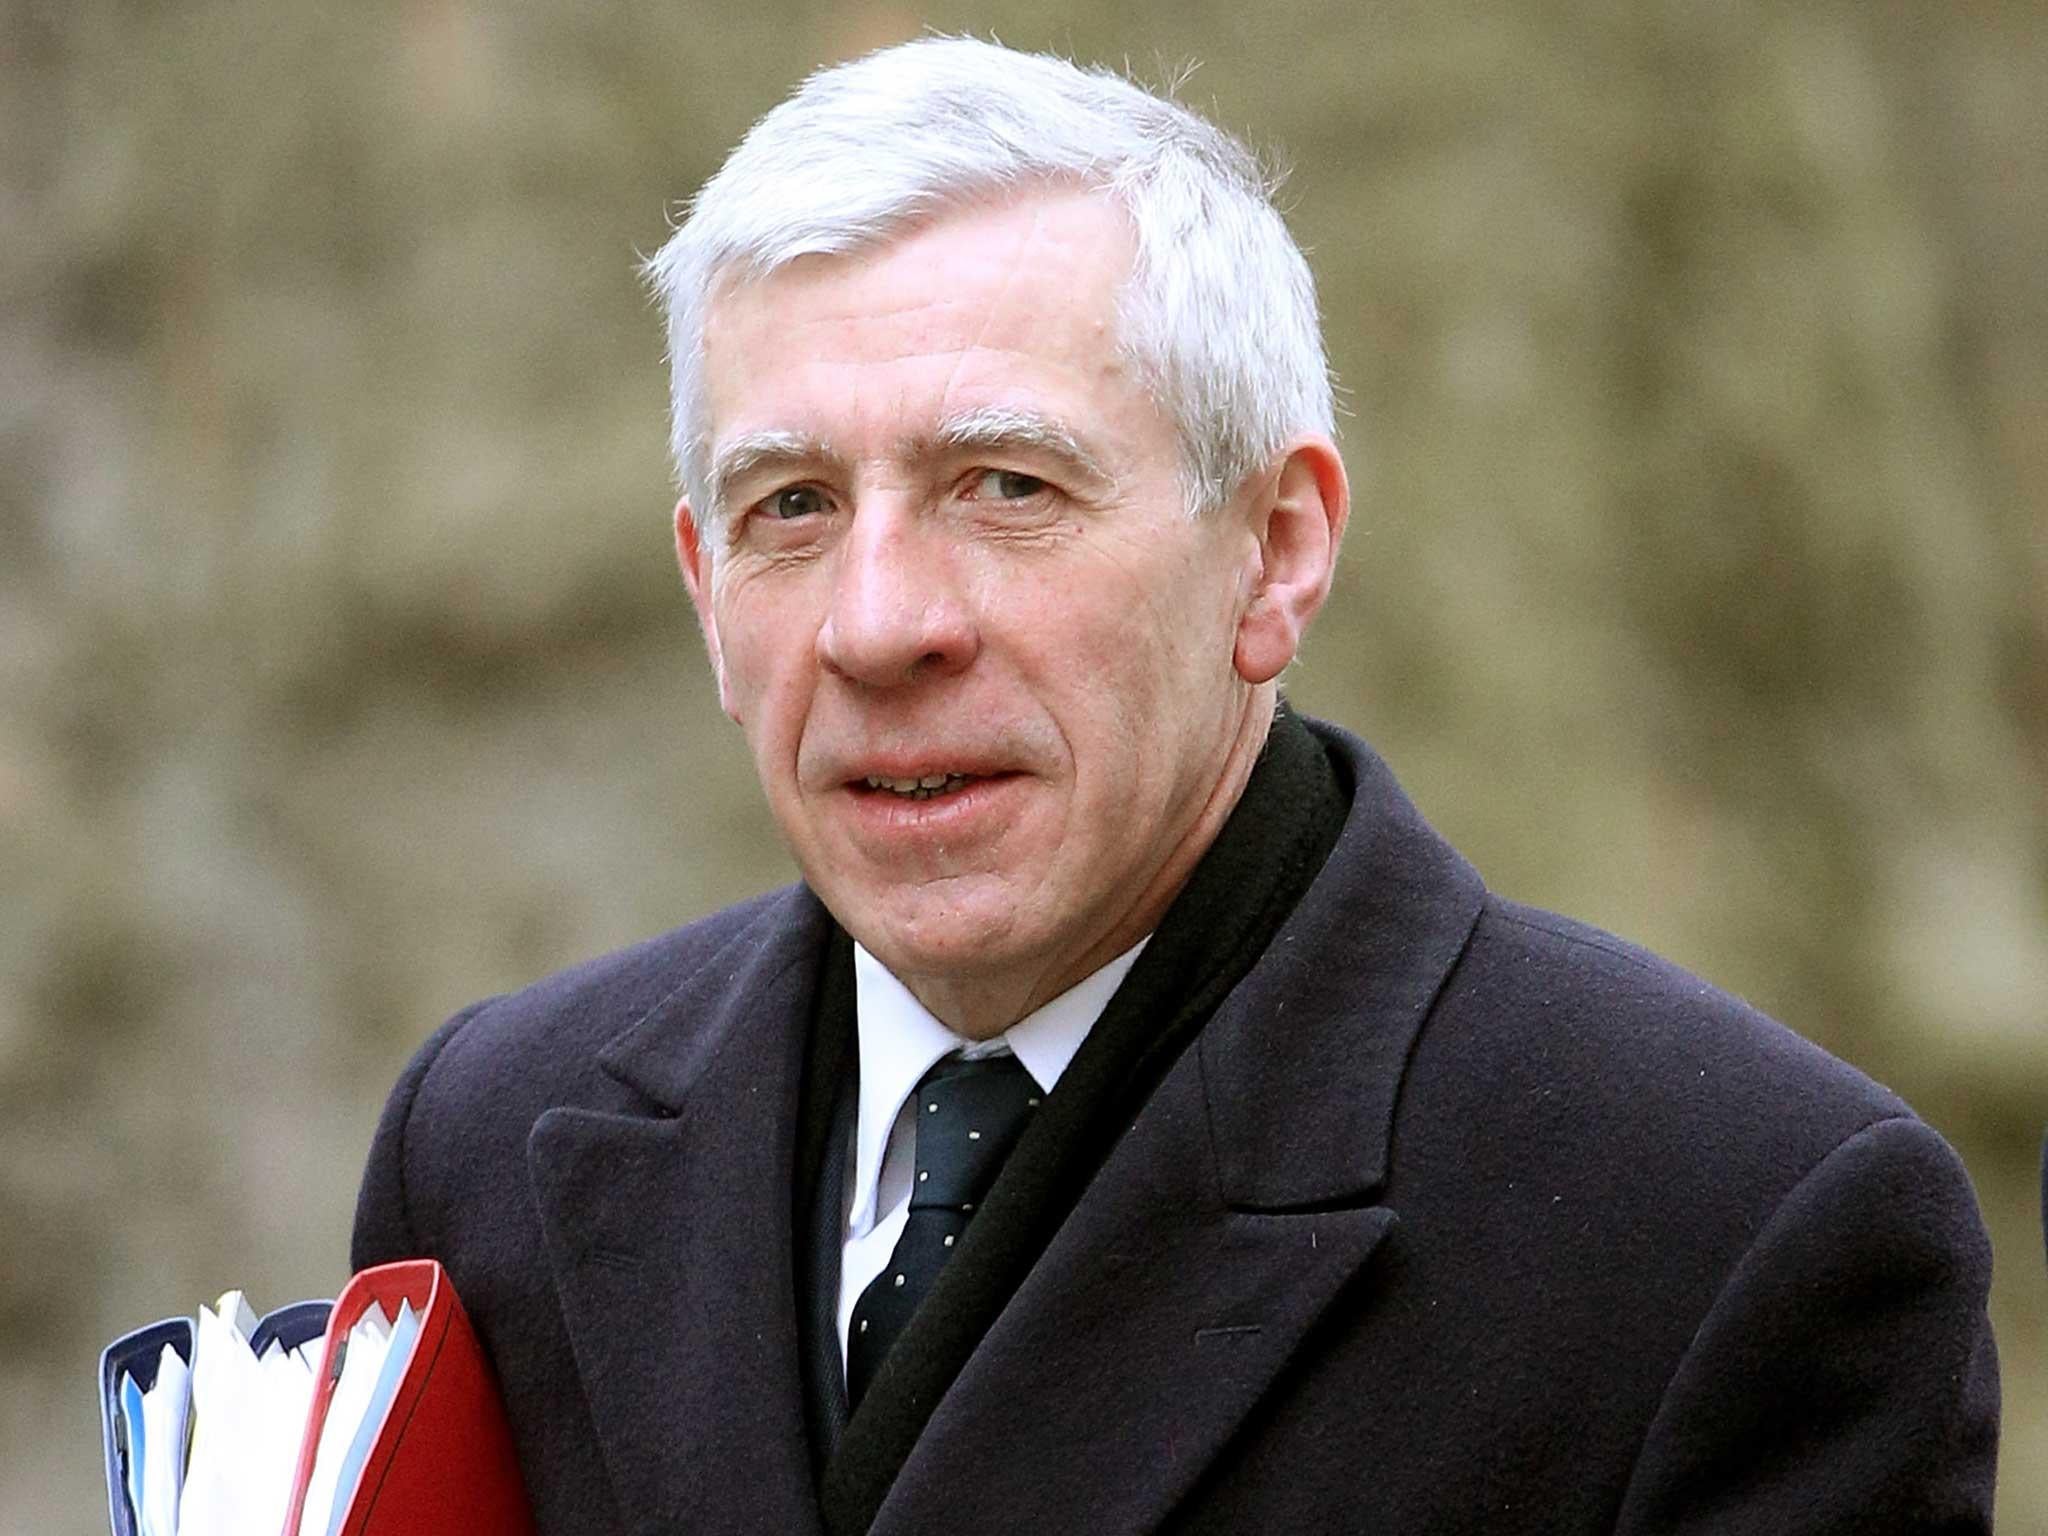 Jack Straw was Foreign Secretary at the time of the alleged 'extreme rendition'